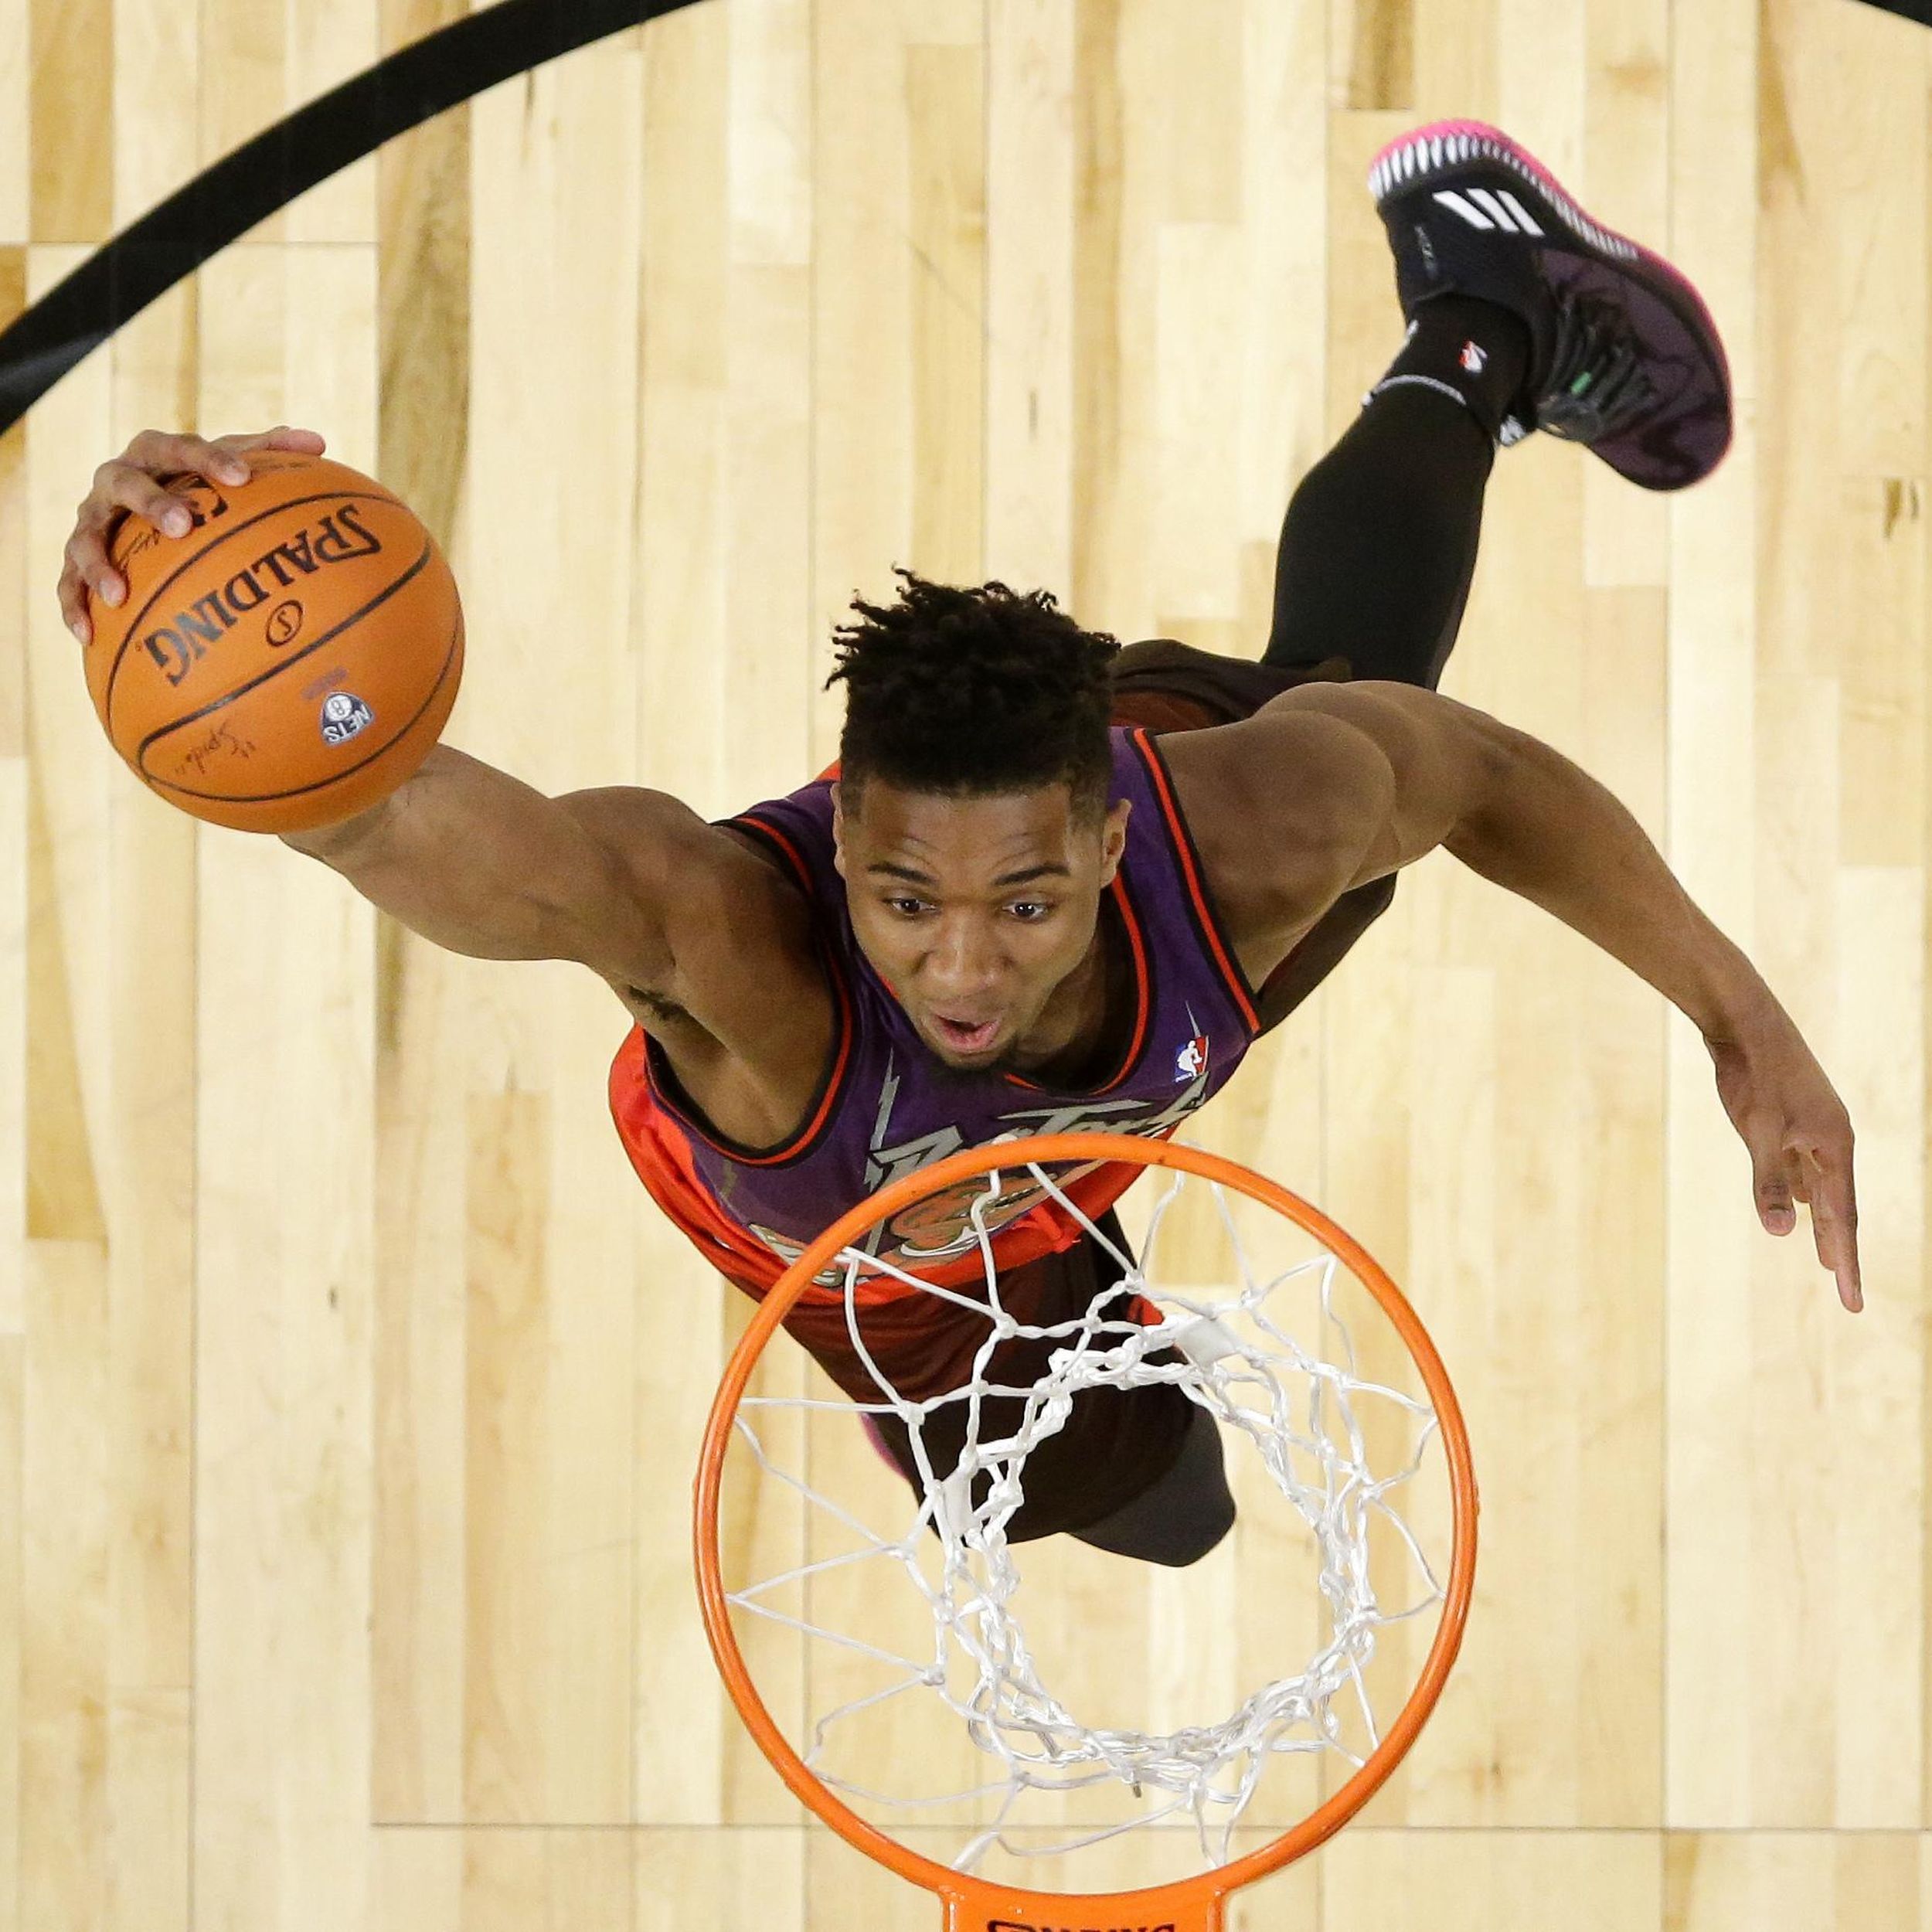 NBA All star weekend: Donovan Mitchell soars to dunk title, Devin